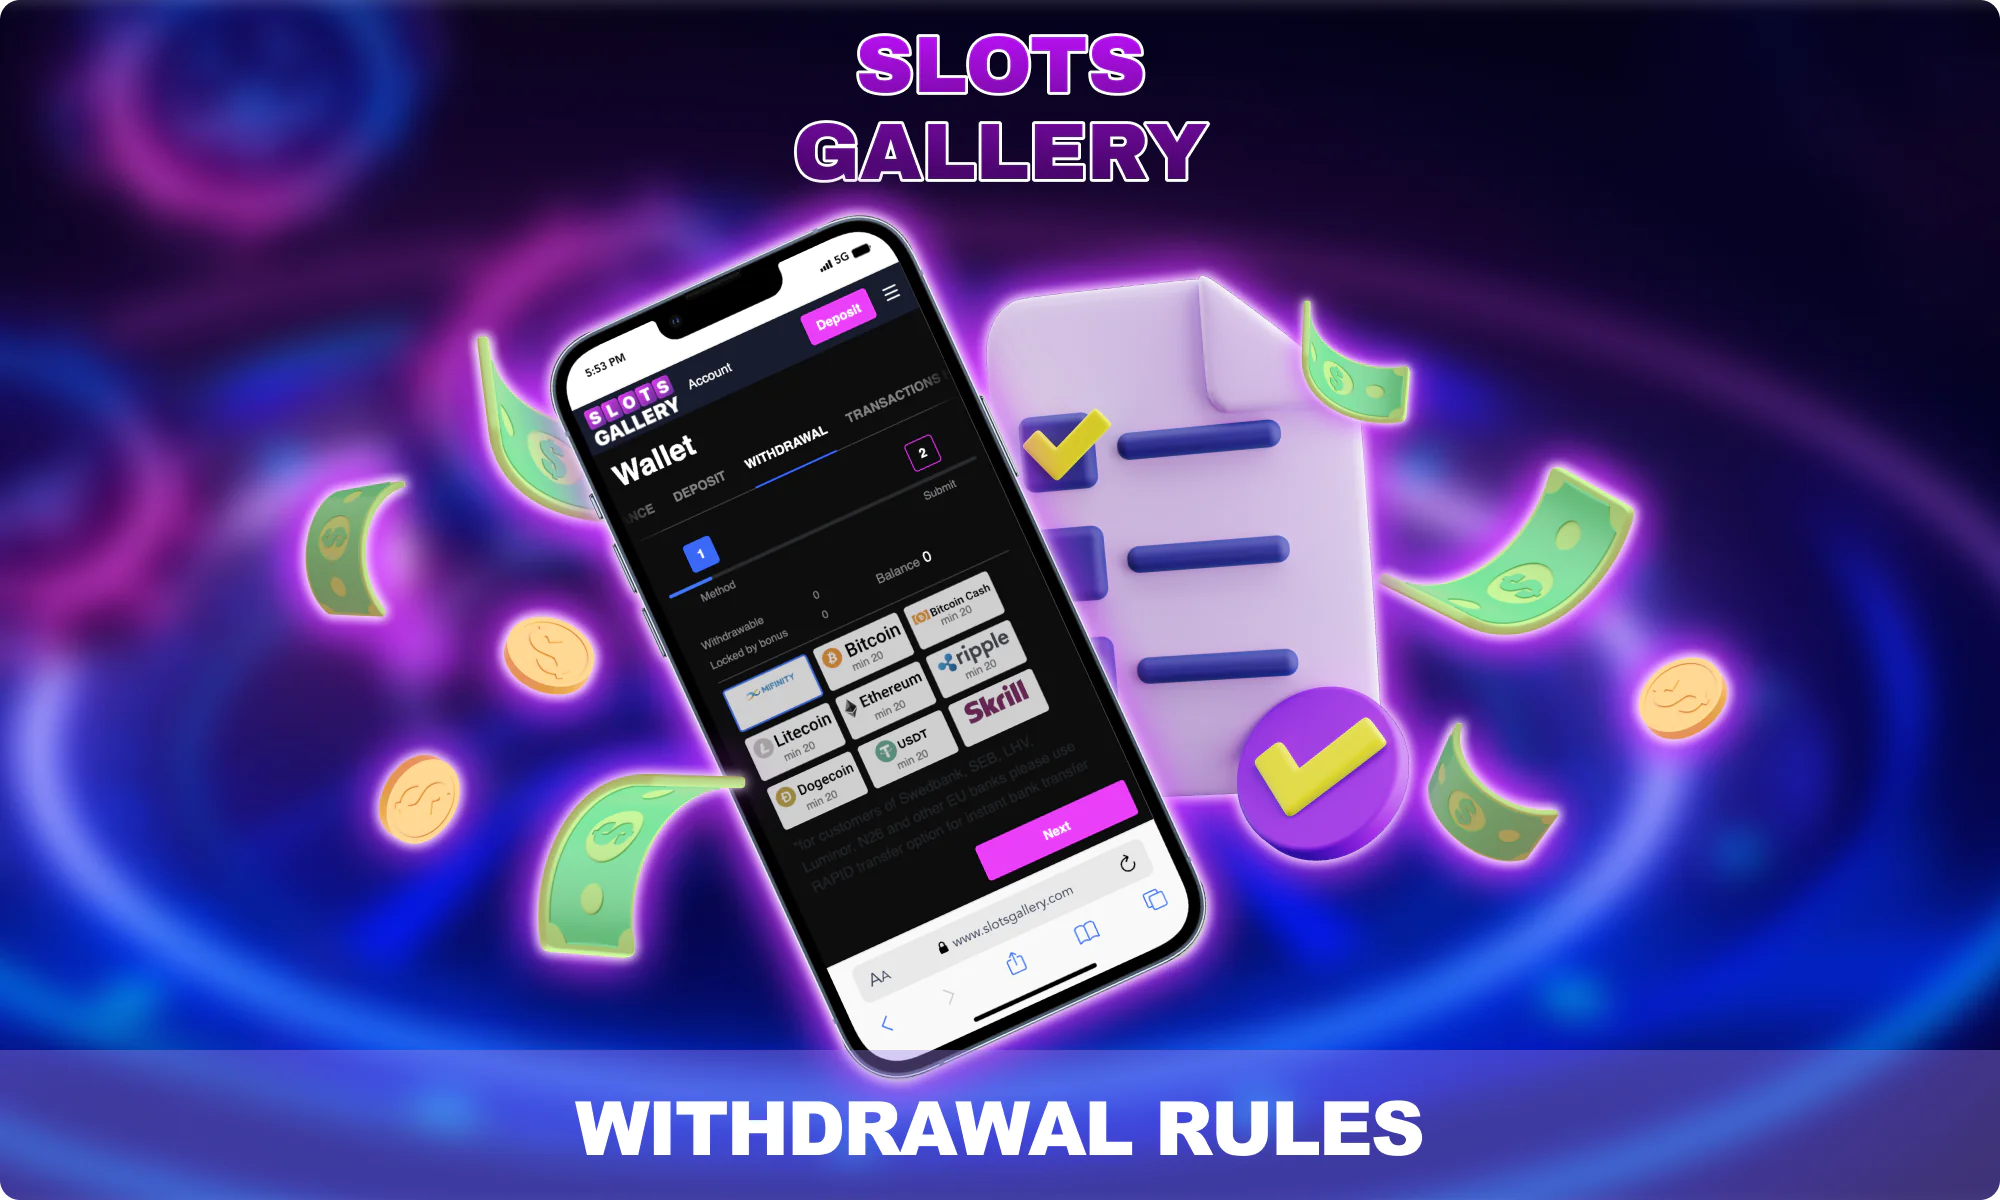 Slots Gallery - Rules for withdrawing money from the site